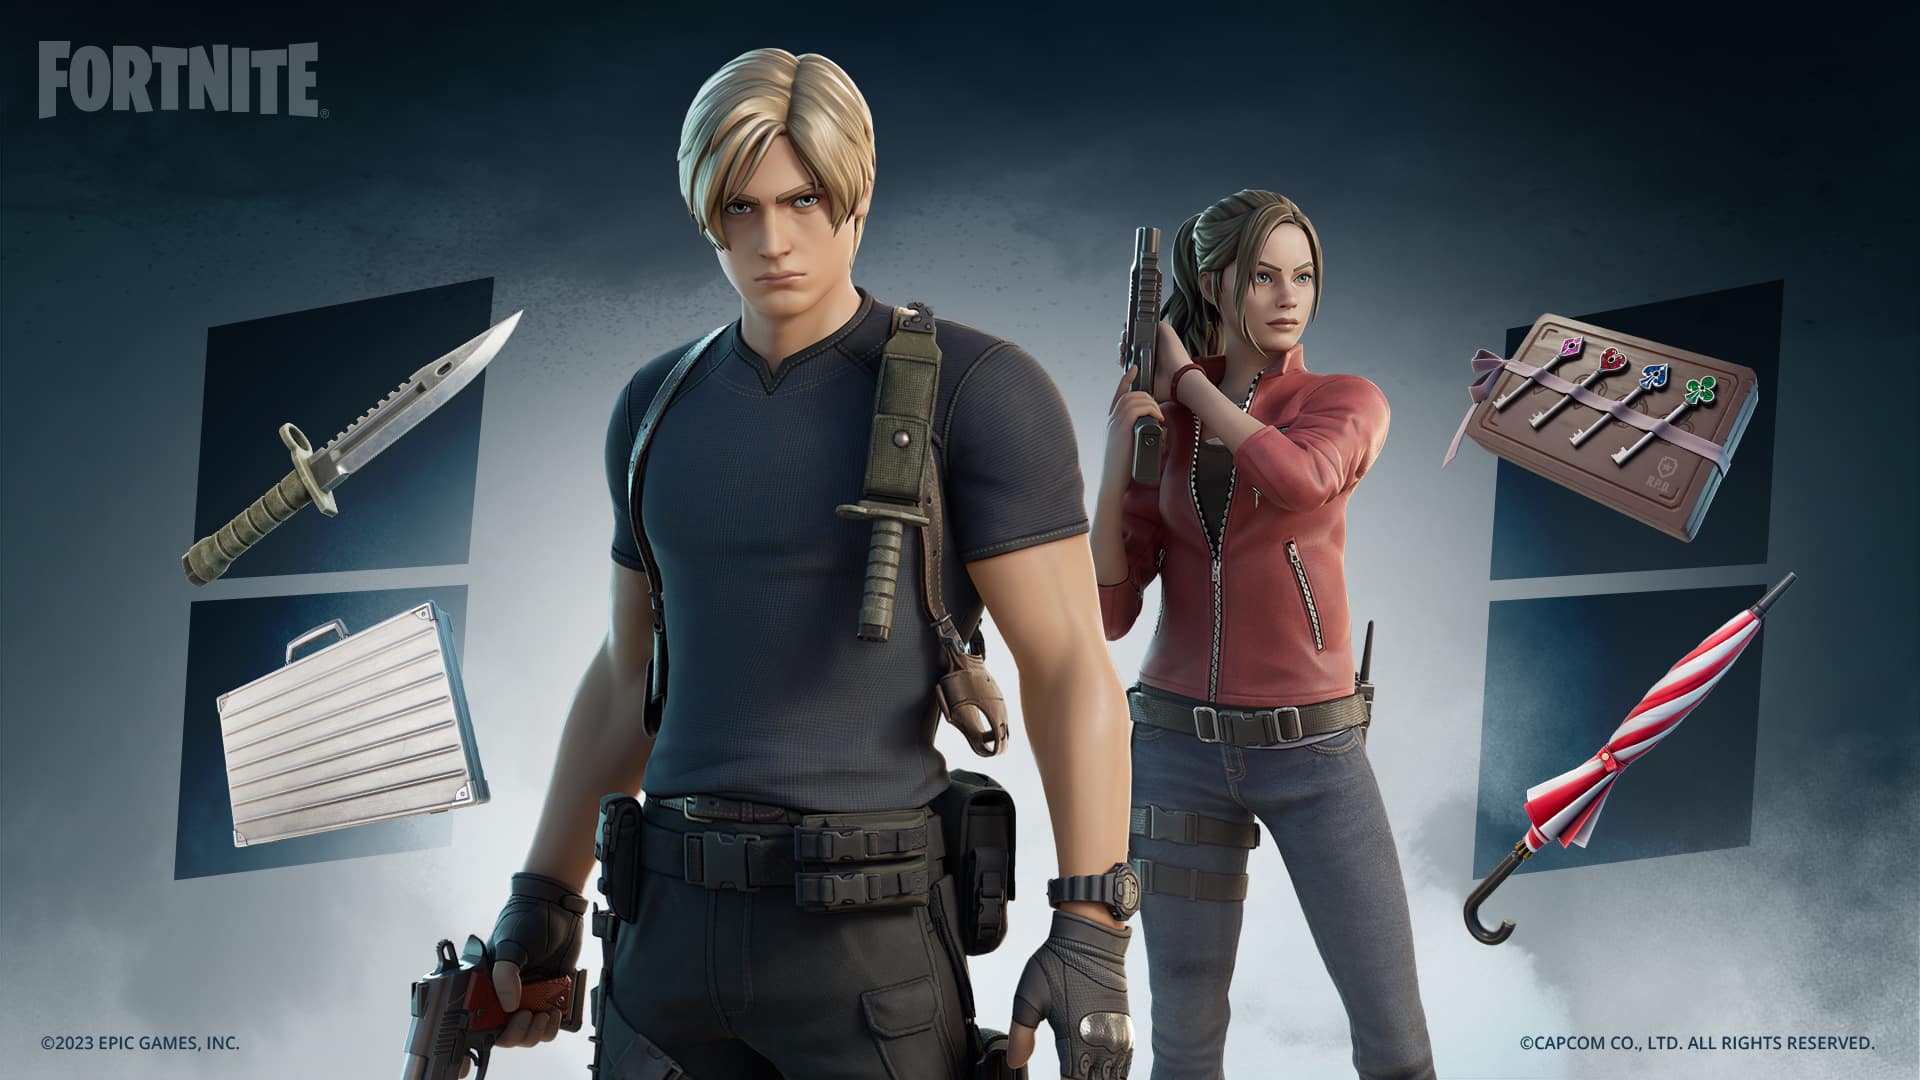 Resident Evil 4 characters arrive at Fortnite in new collaboration